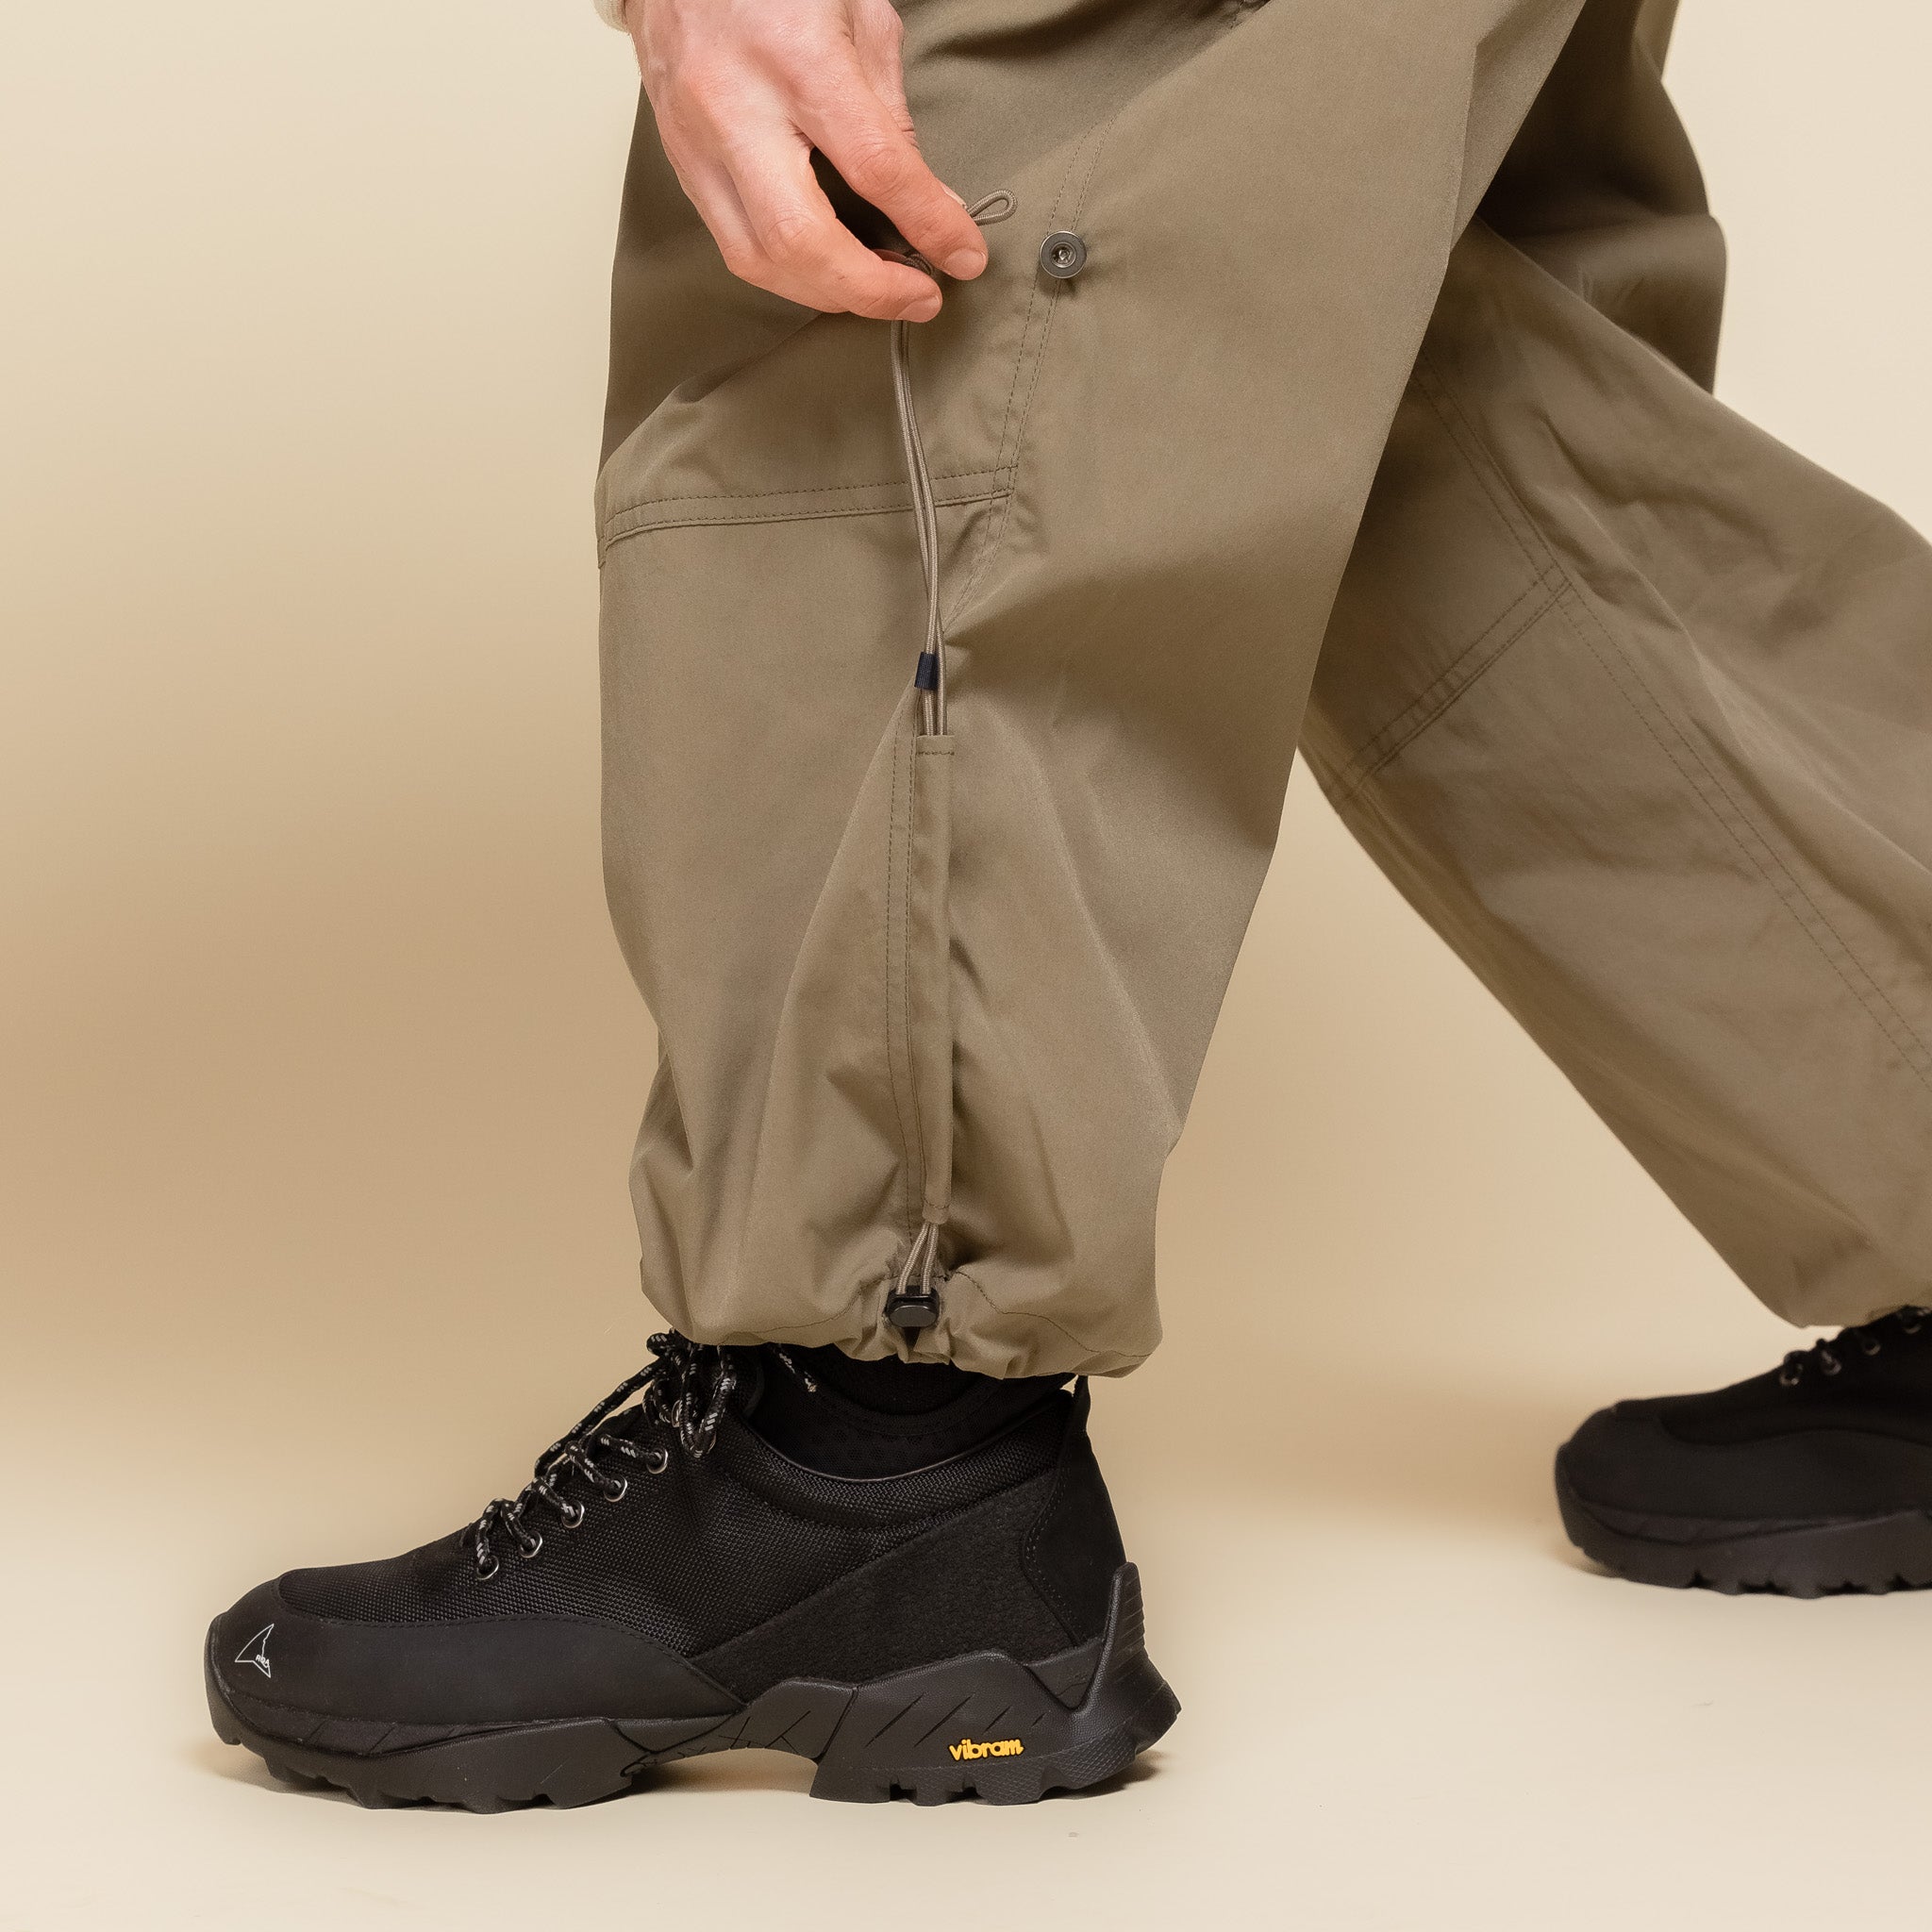 Poliquant - Changing Length Wide Pants - Grey Khaki "poliquant stockists" "poliquant pants" "poliquant website"